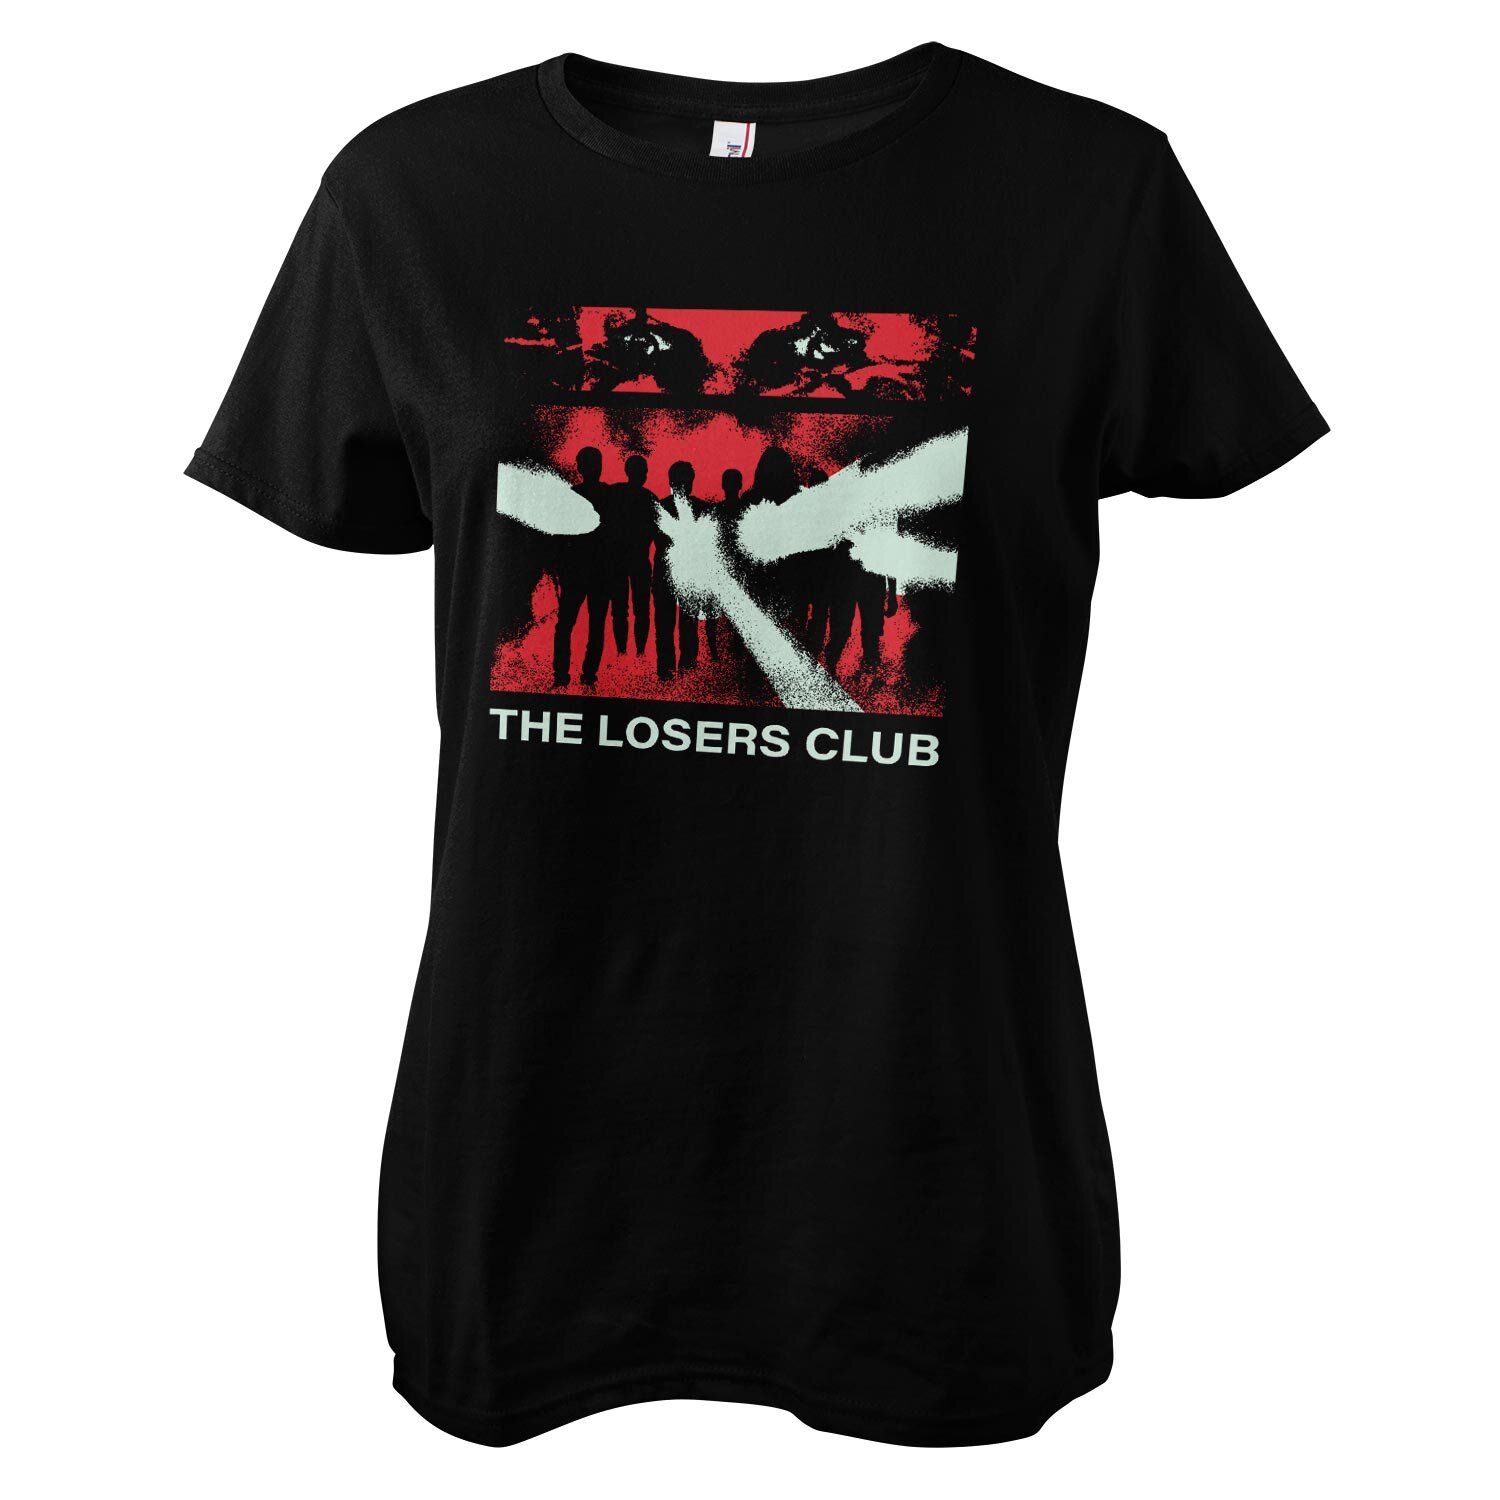 IT - The Losers Club Girly Tee